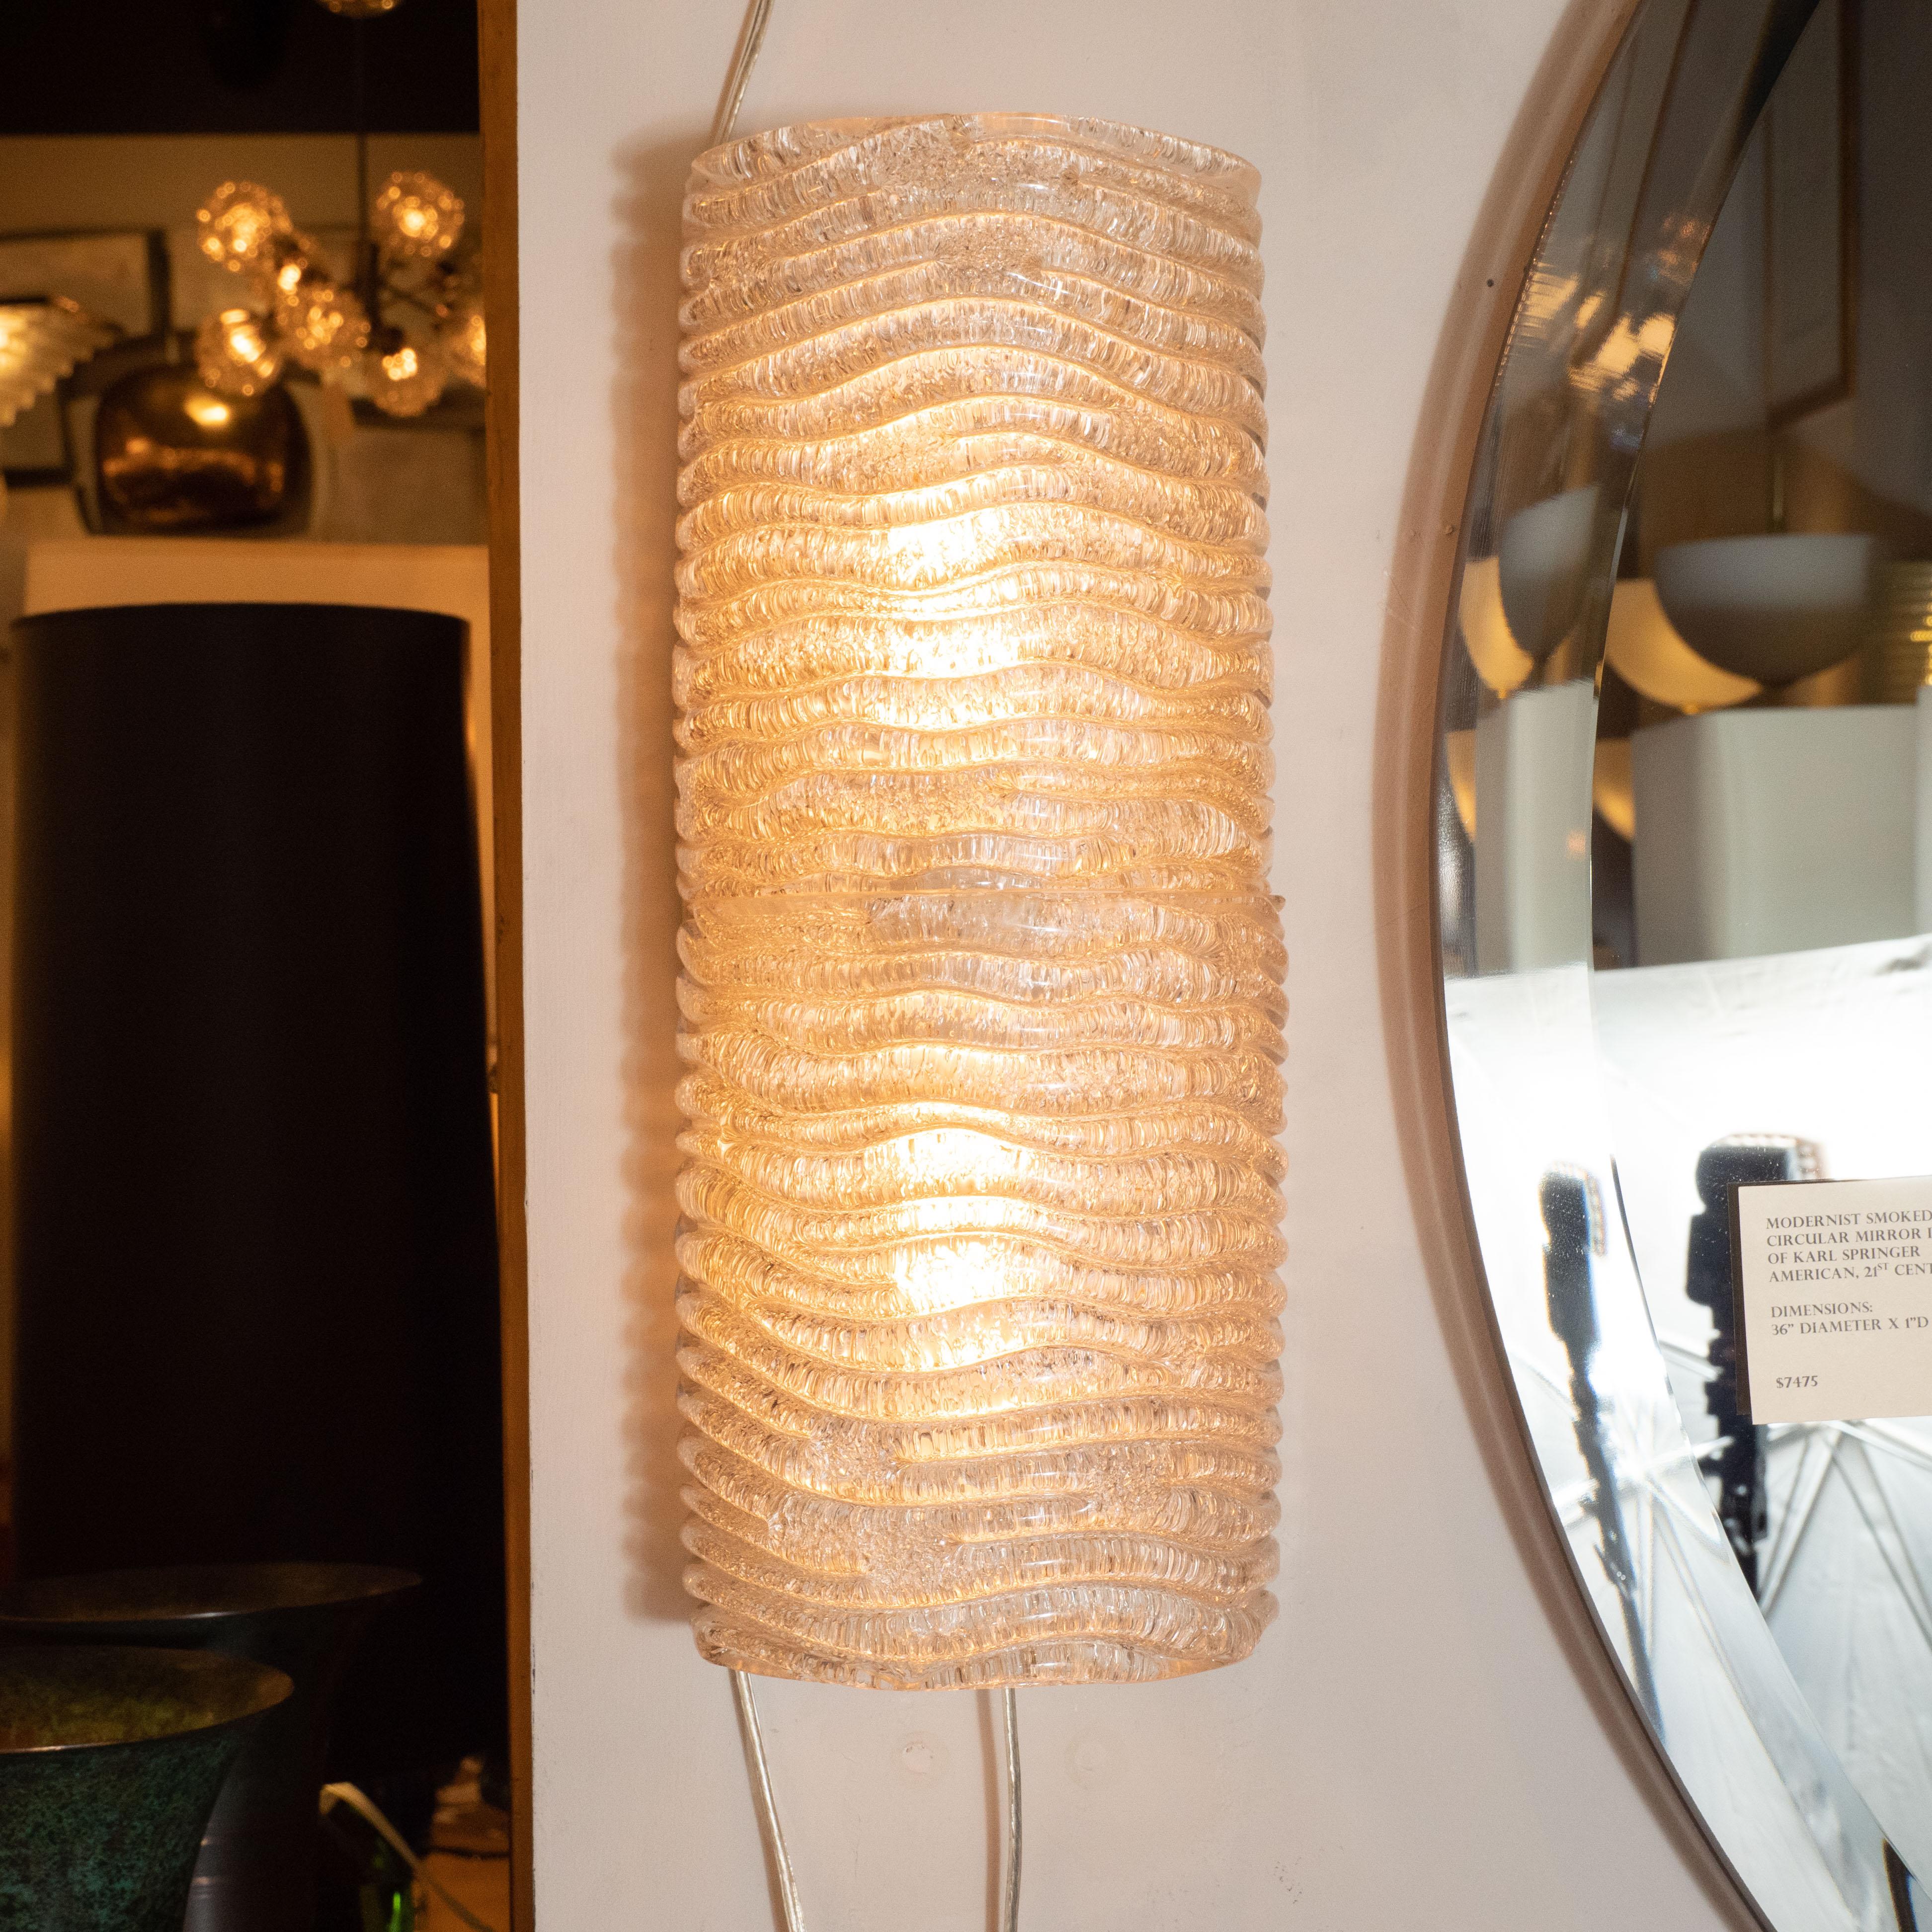 This pair of Mid-Century Modern sconces were hand blown in Italy circa 1950. Each sconce features tight rows of arched, organically shaped textured glass bands. The dynamic rhythm embedded in the glass provides an elegant contrast to the overall